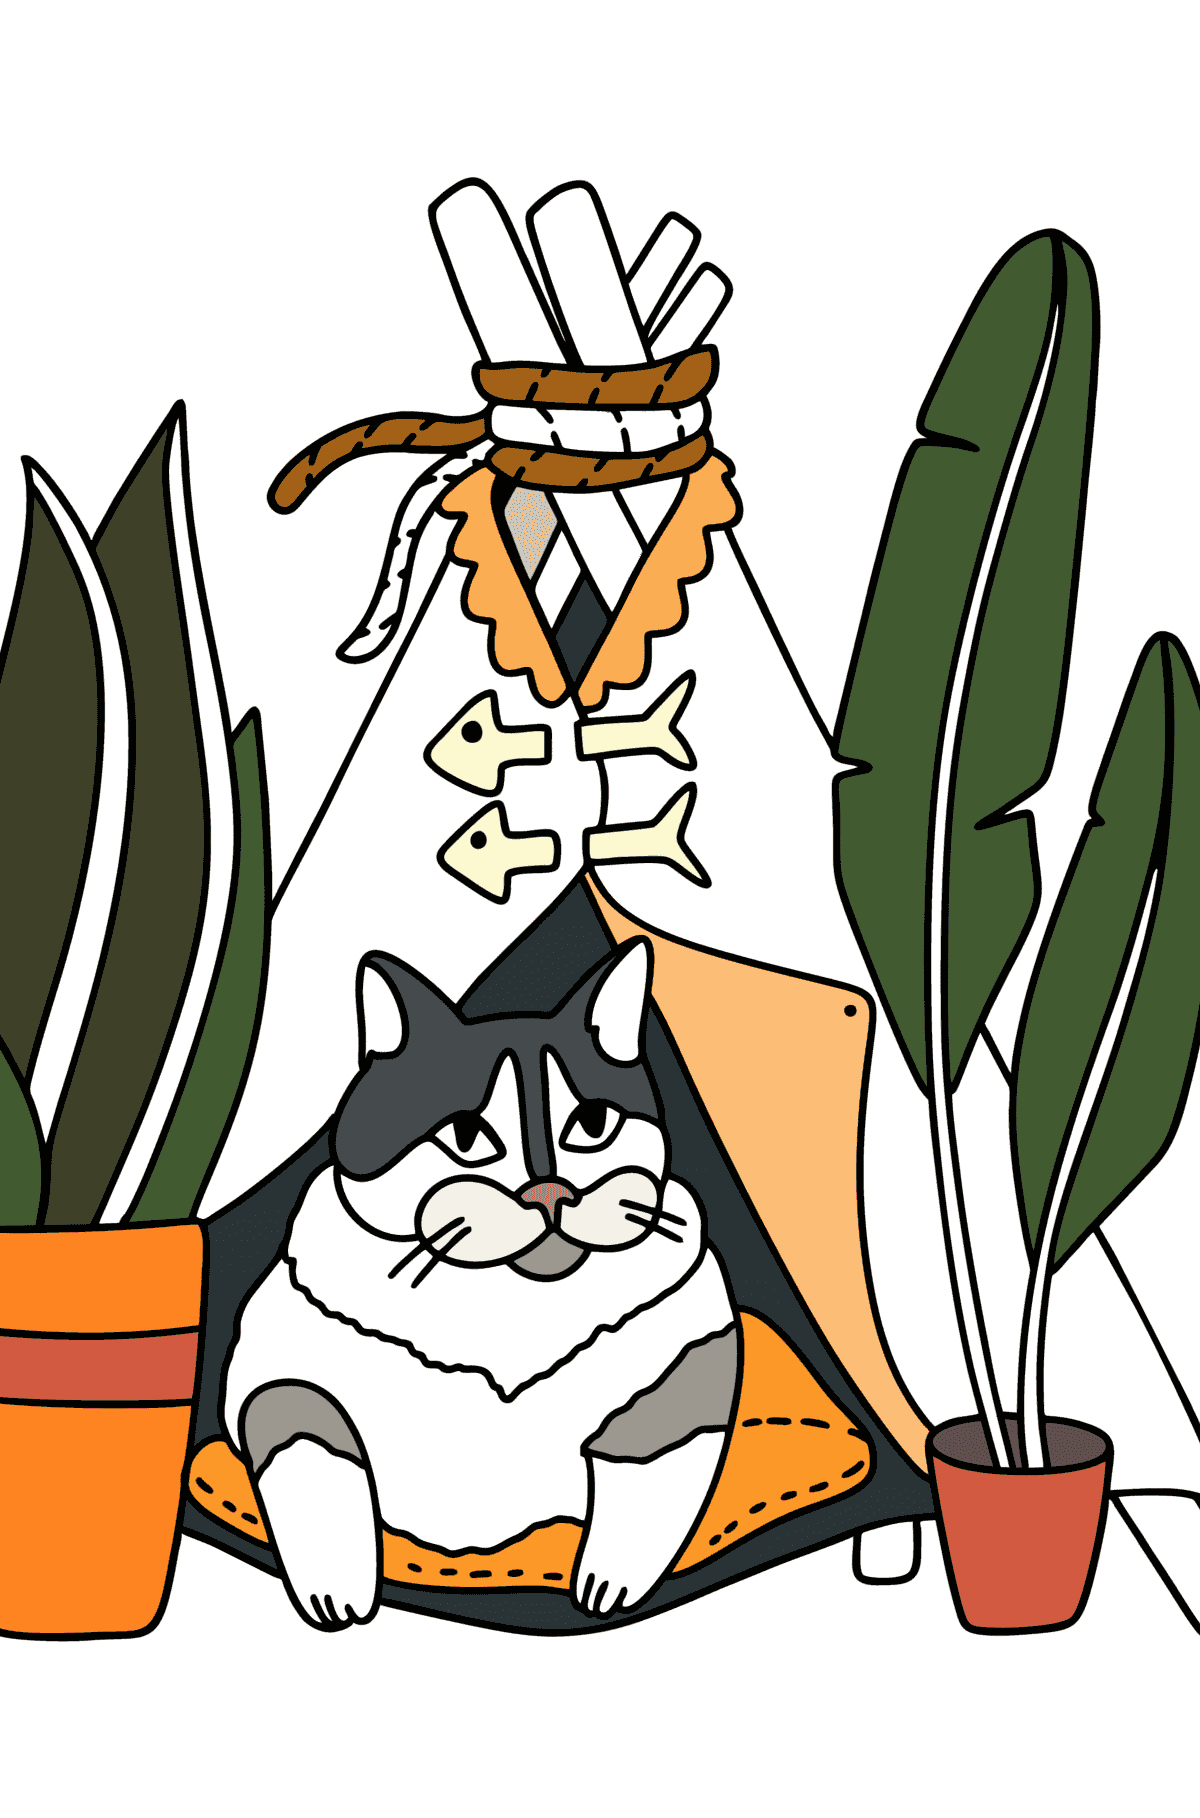 Cat House coloring page - Coloring Pages for Kids